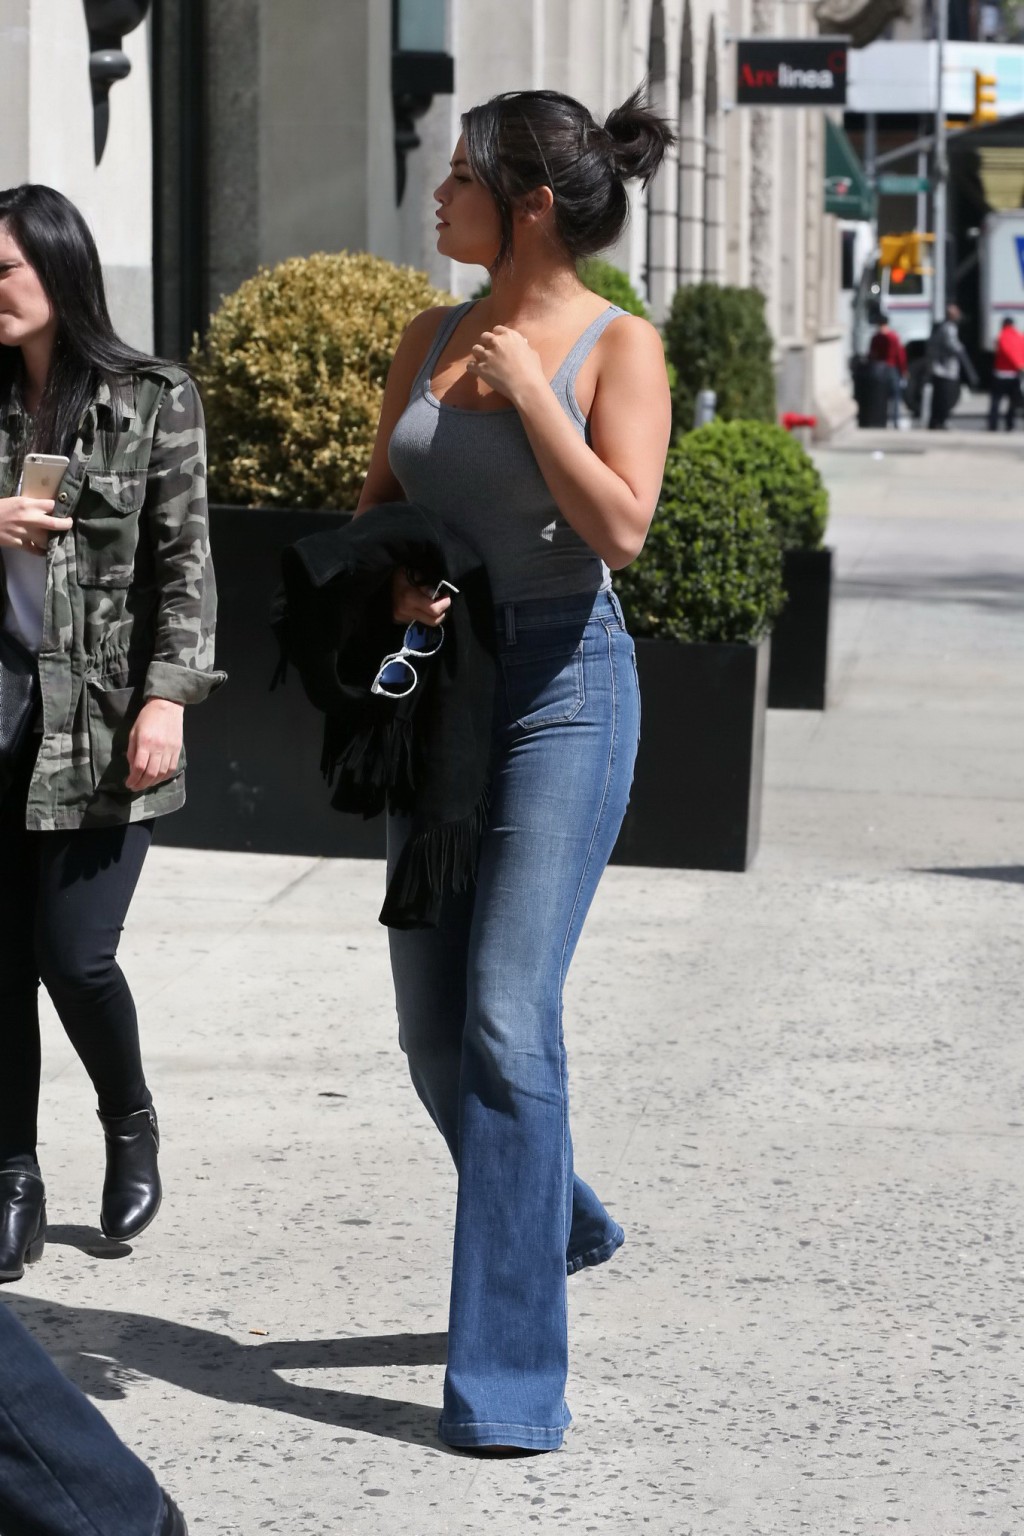 Selena Gomez busty wearing skimpy gray top and jeans out in NYC #75165024